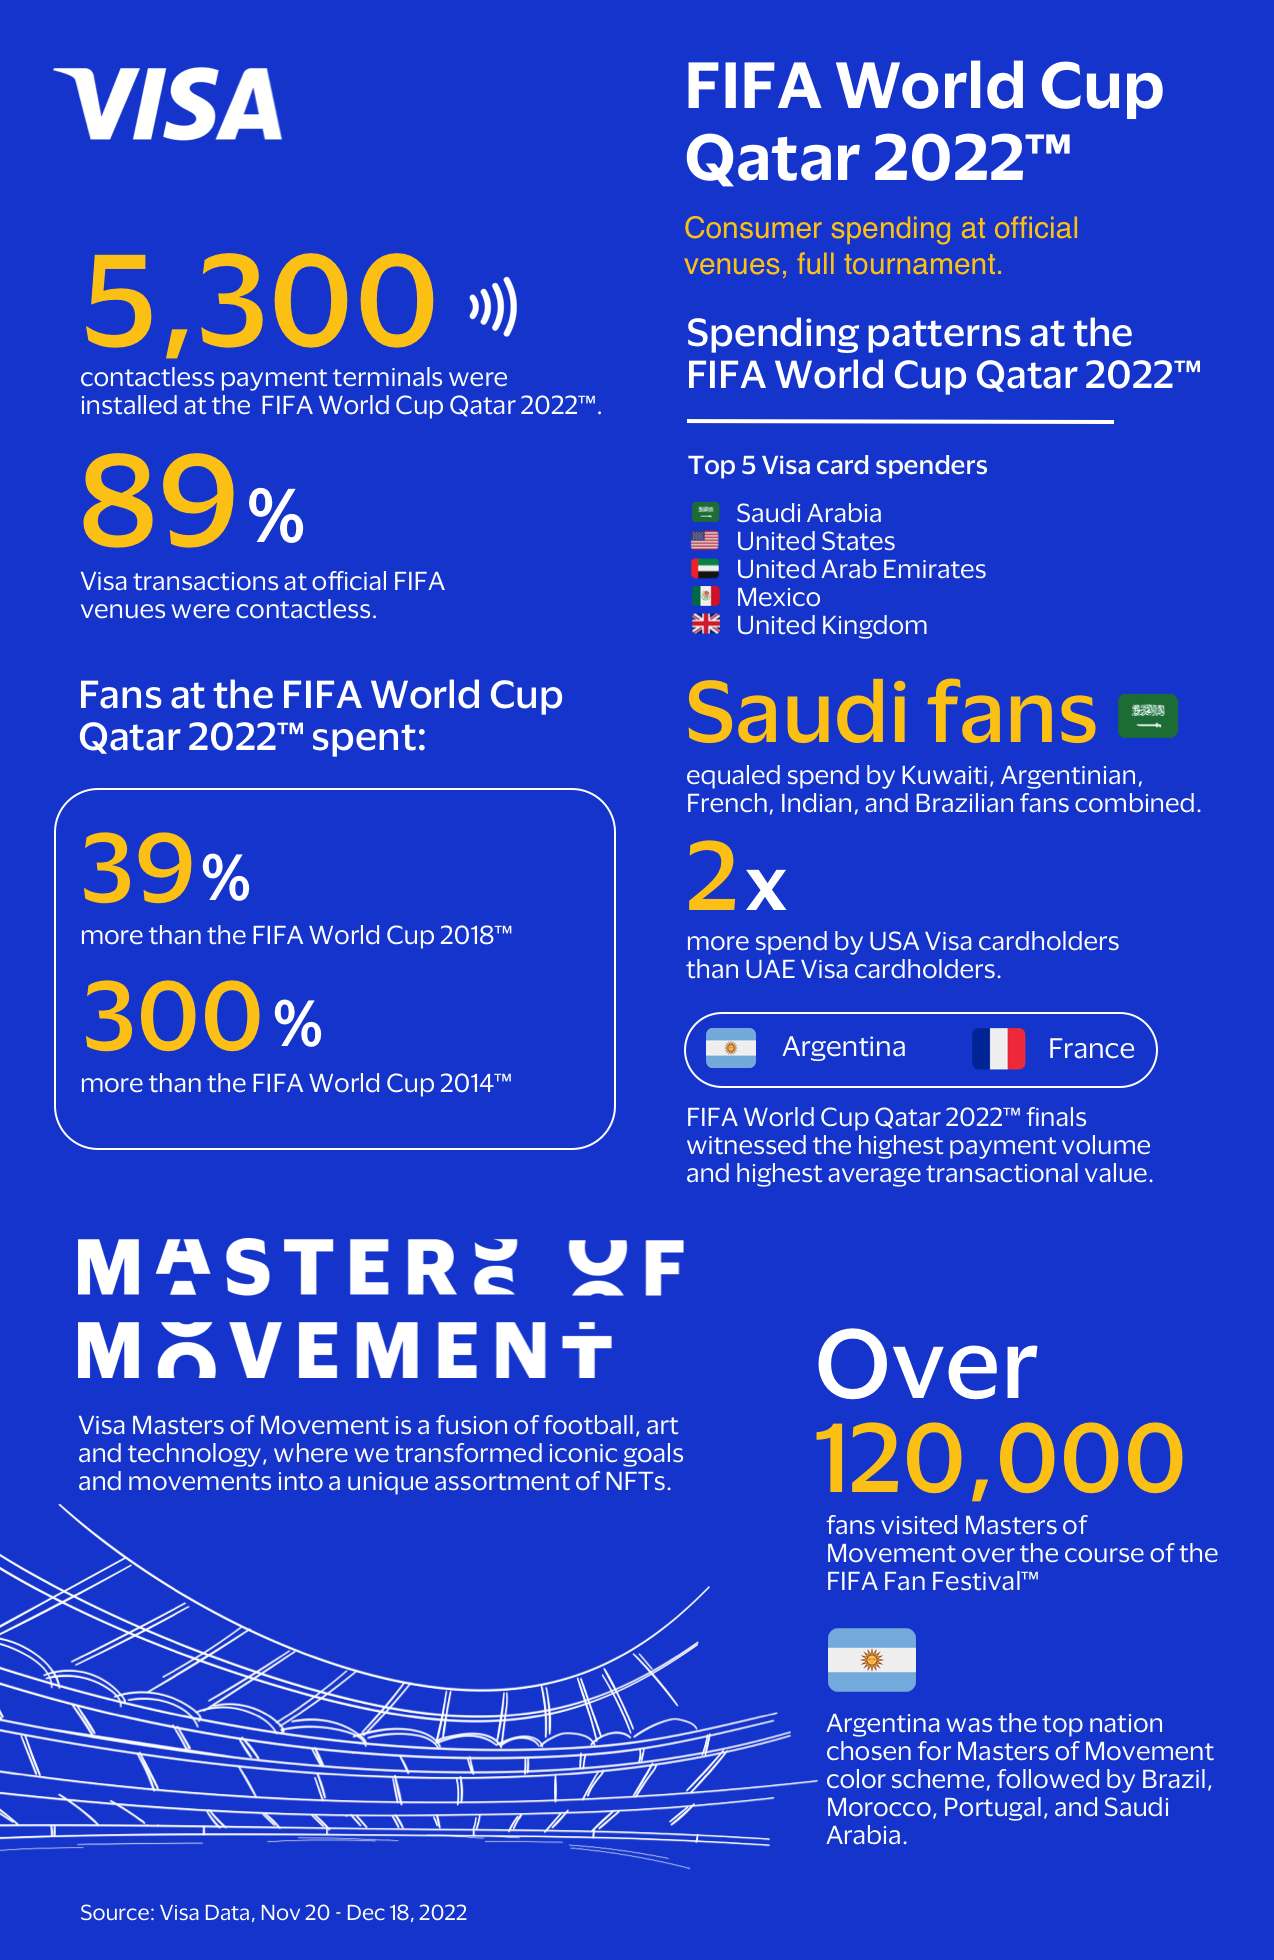 Digital Payments Took Center Stage at FIFA World Cup Qatar 2022™ Visa